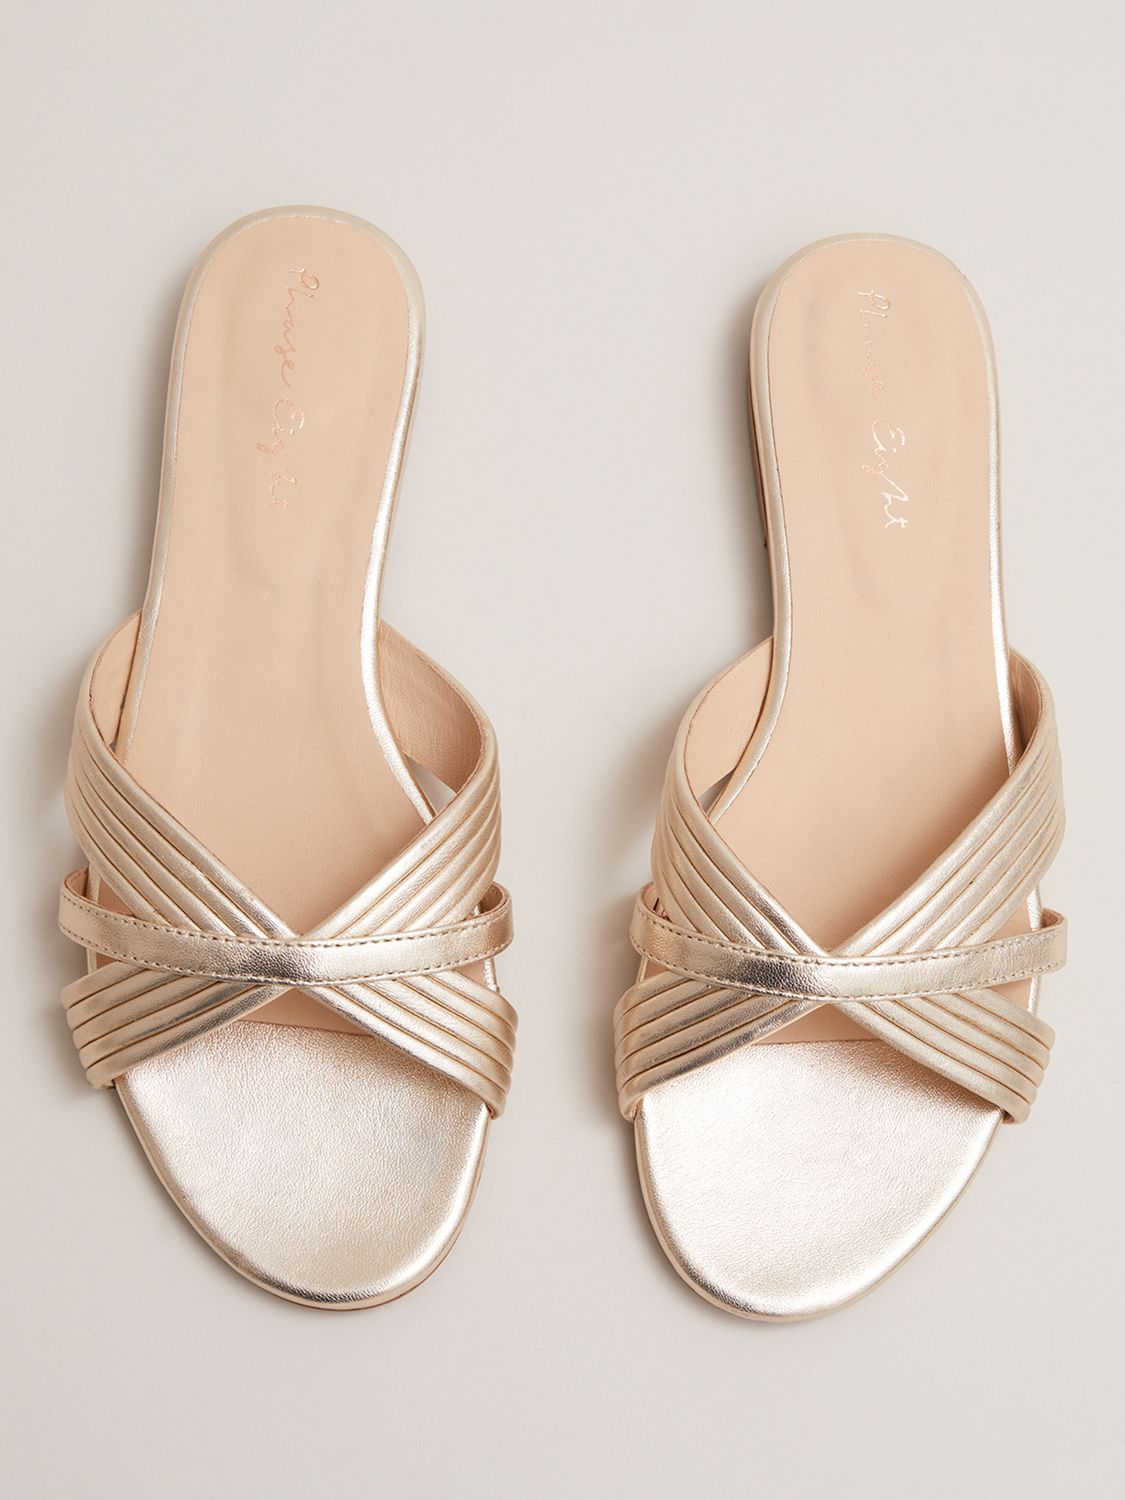 Buy Phase Eight Leather Slip On Sandals, Gold Online at johnlewis.com